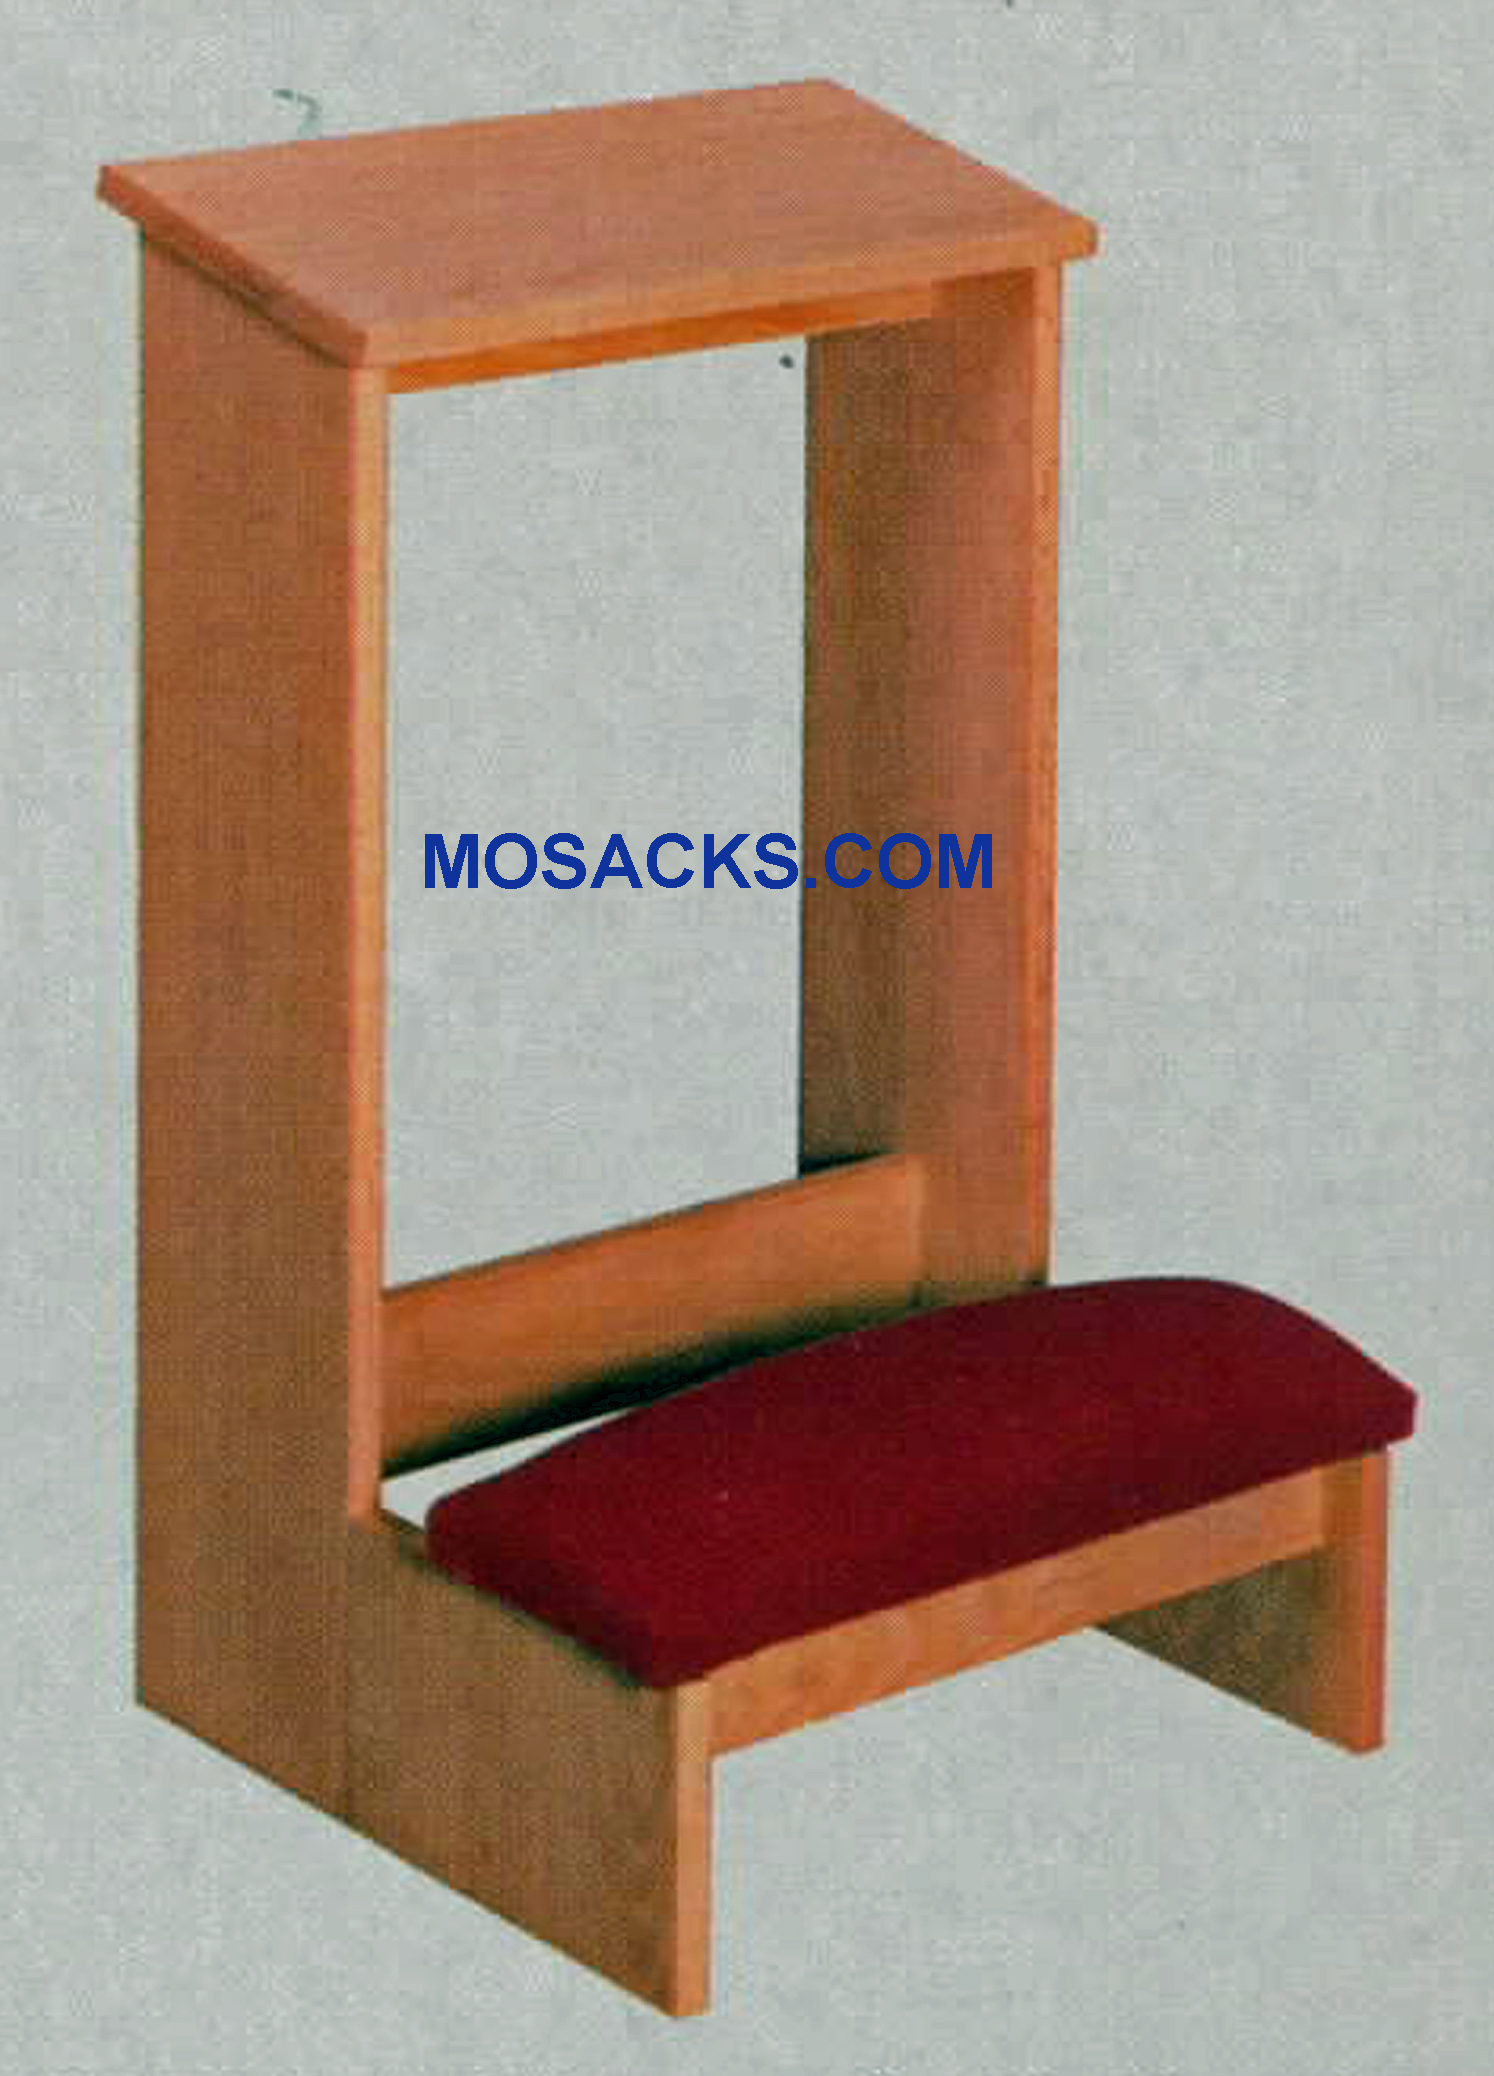 W Brand Prie Dieu with upholstered kneeler and a shelf 19" w x 19" d x 30" h 40-2300. This Prie Dieu Kneeler is finished wood with a slanted shelf for arm comfort and upholstered kneeler. Various wood stains and colored fabrics are available #2300